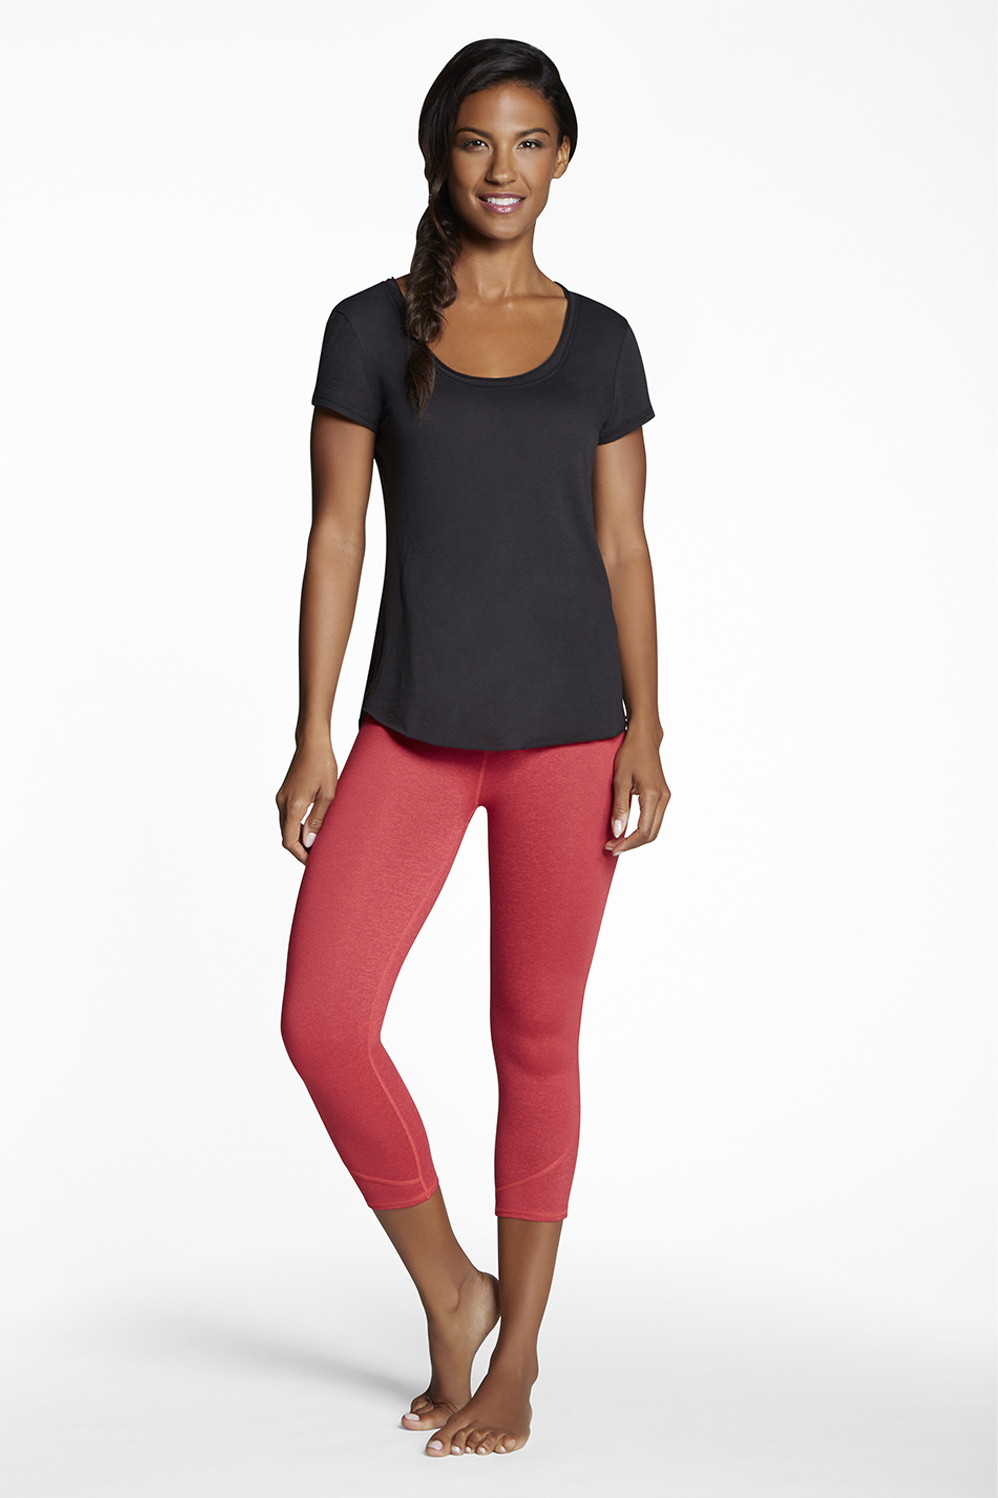 Wanted Outfit - Get great athletic wear at Fabletics